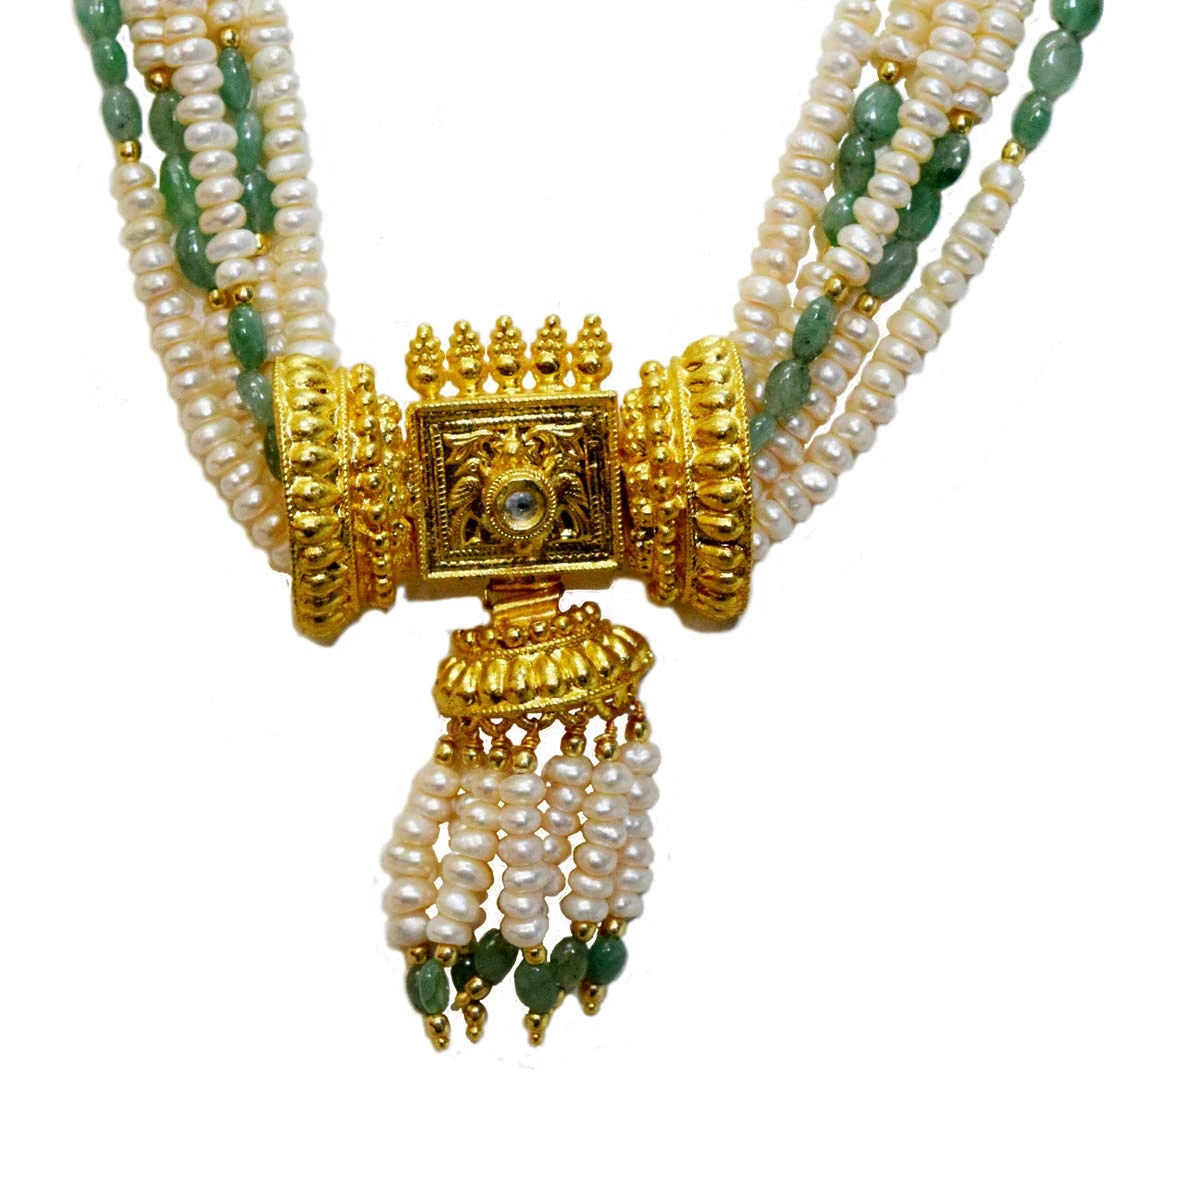 Real Oval Emerald, Freshwater Pearl & Gold Plated Pendant Necklace for Women (SN983)